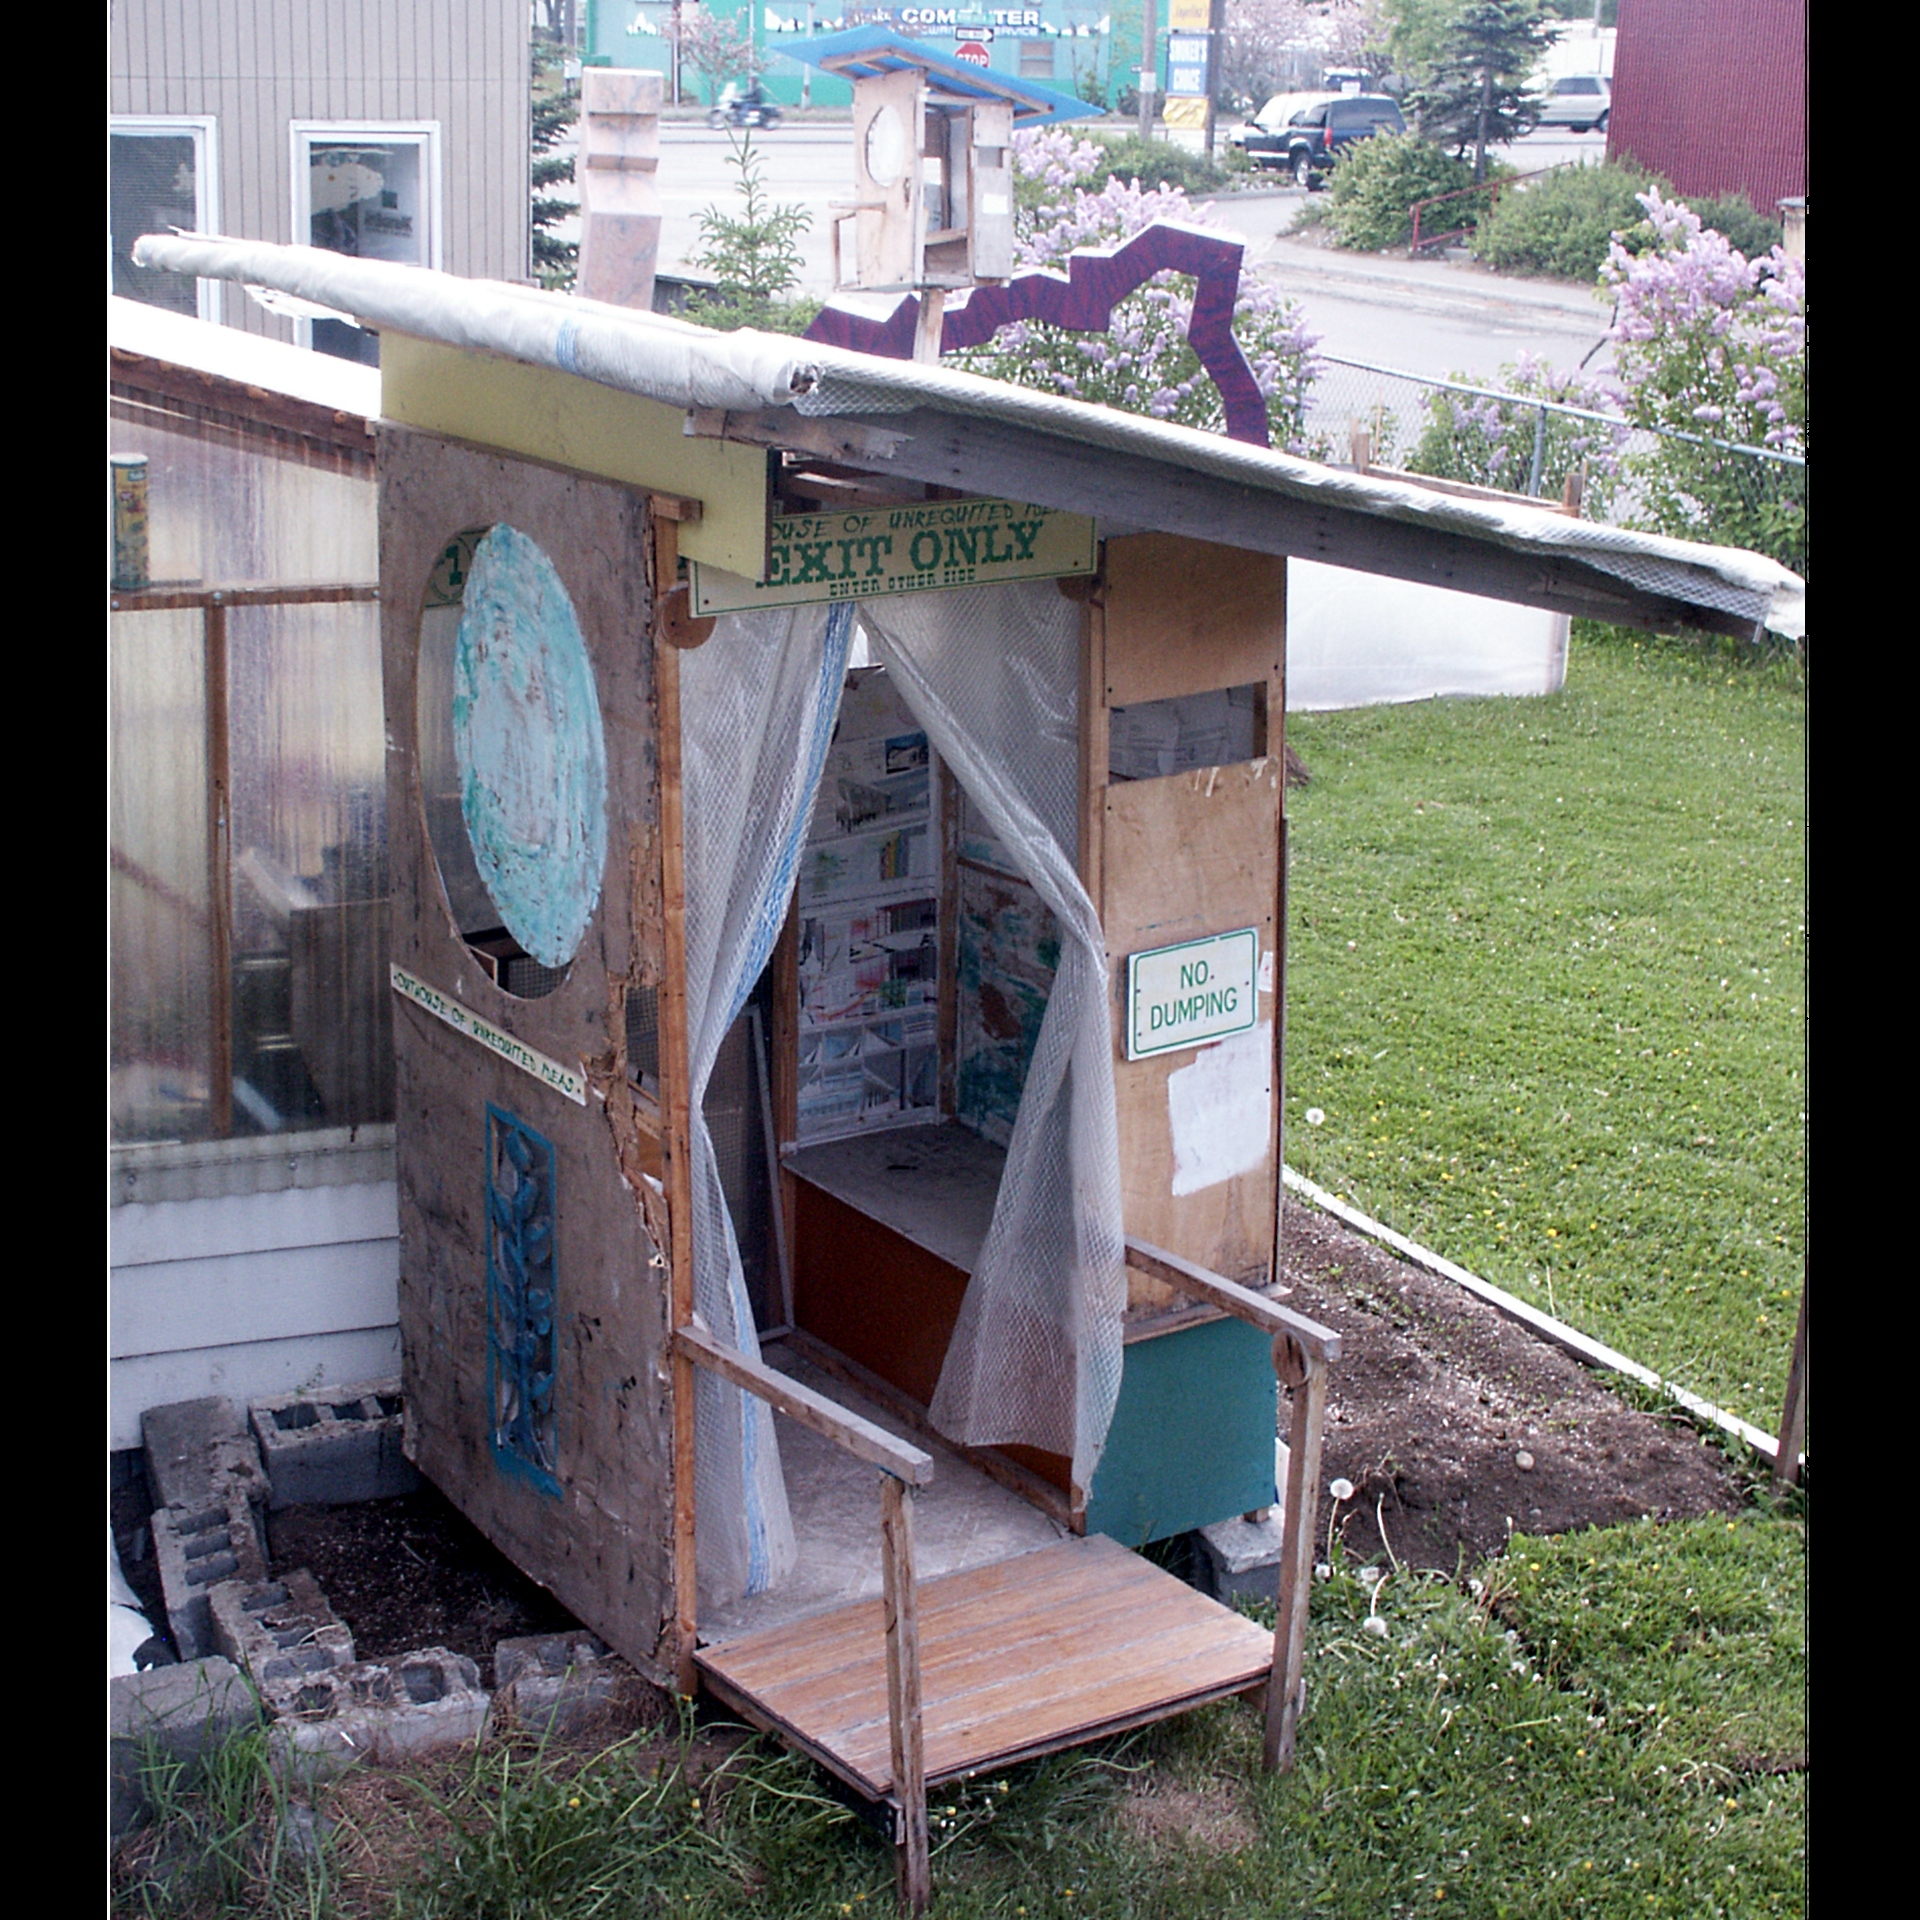 The Outhouse of Unrequited Ideas